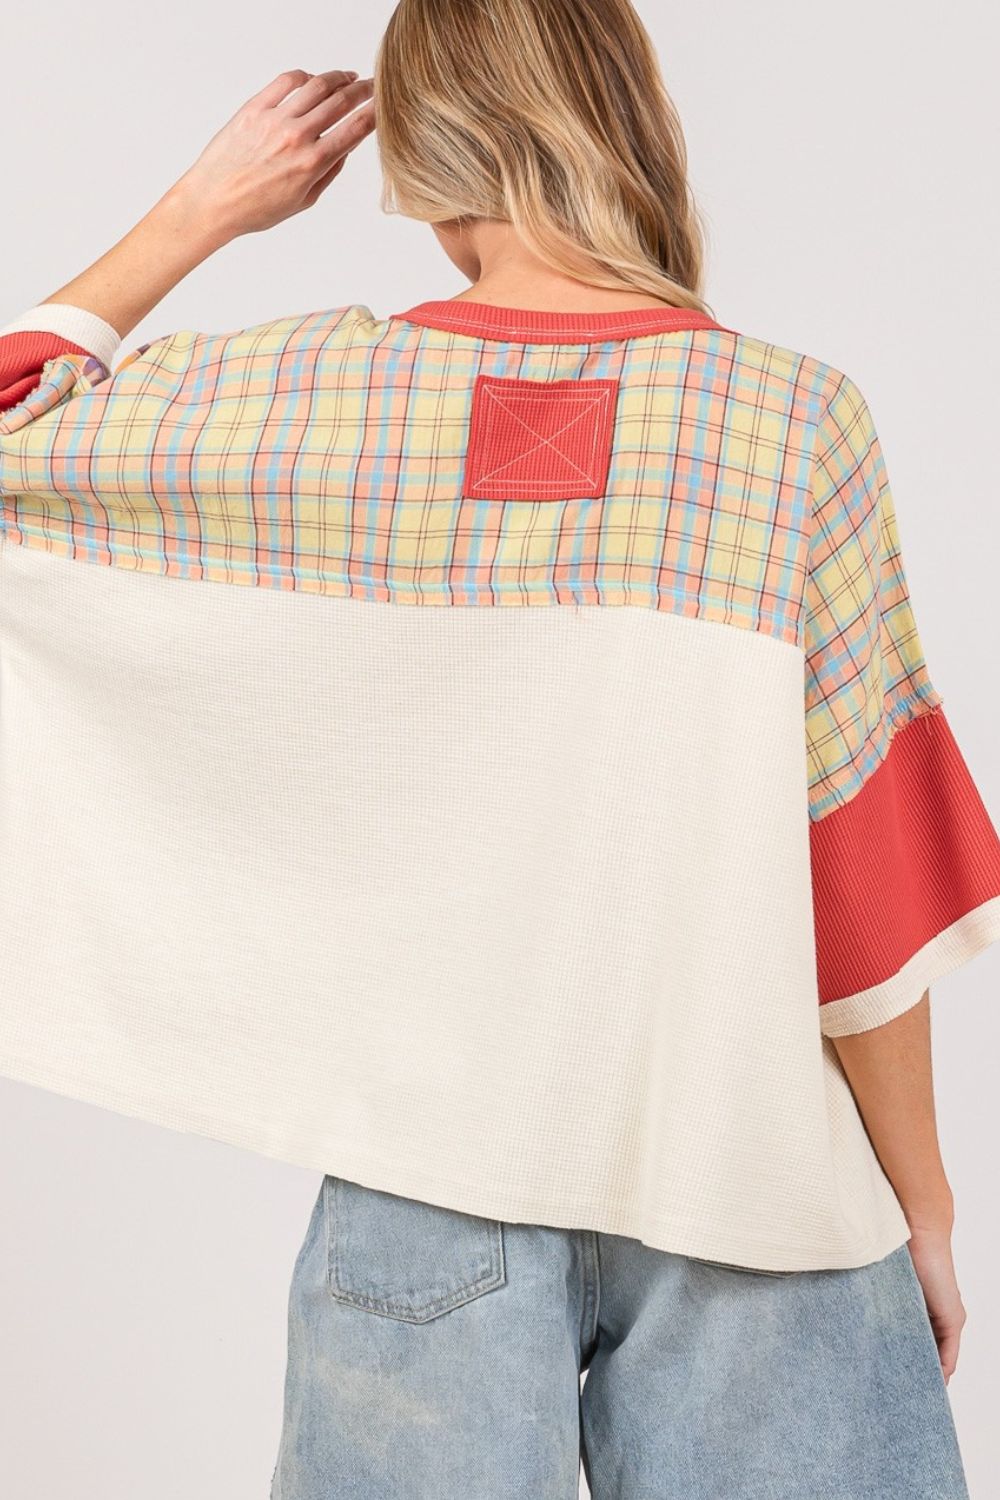 Crew Neck Plaid Star Patch T - Shirt in BerryT - ShirtSAGE+FIG